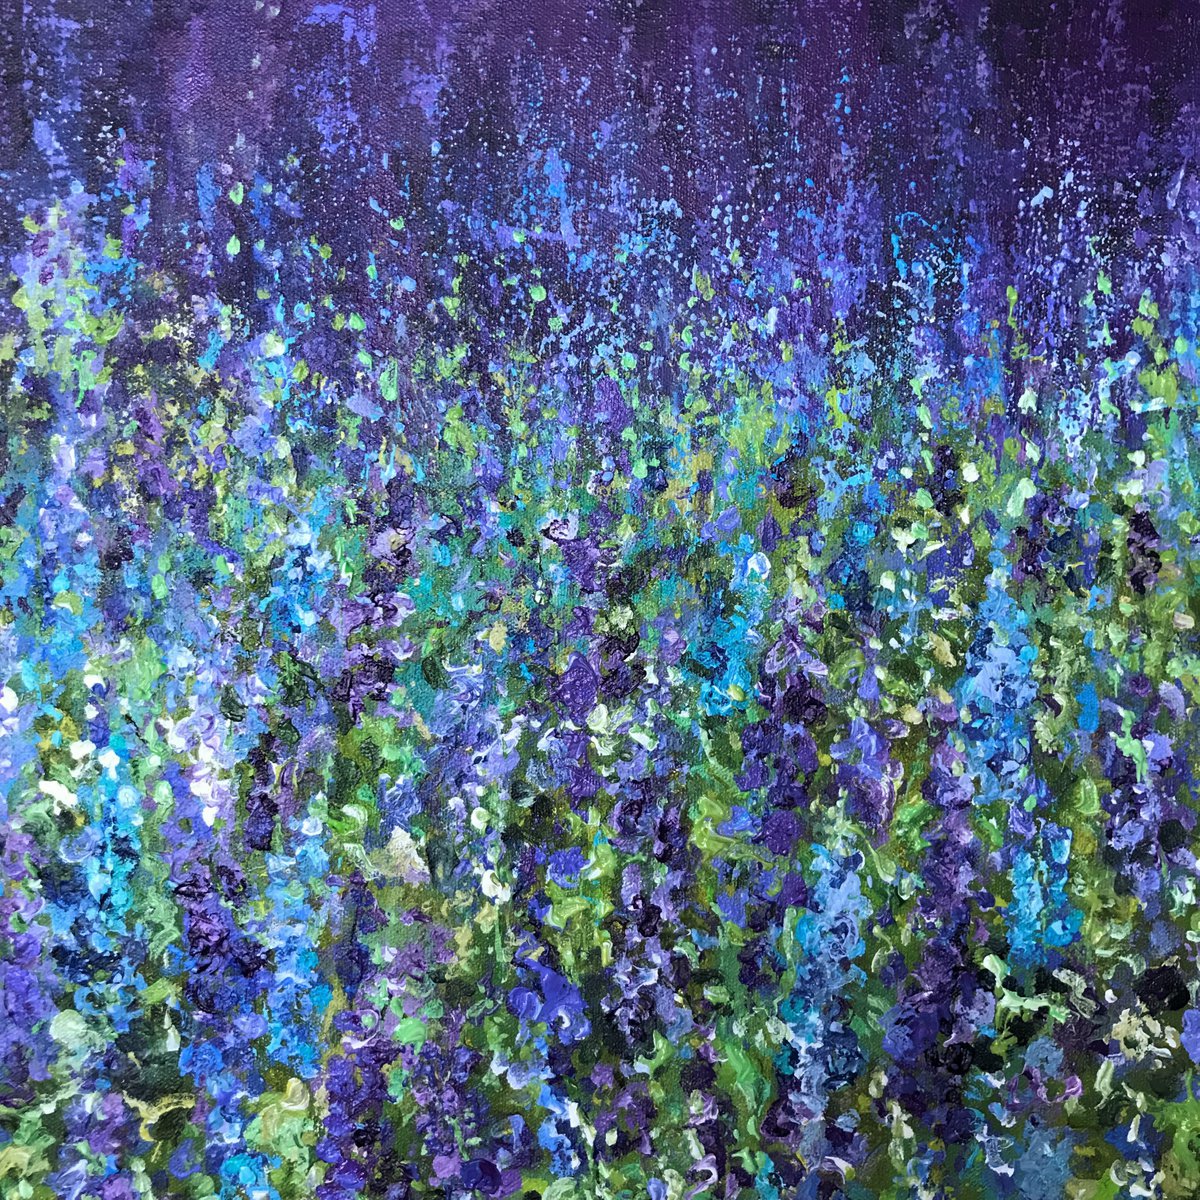 Tangled up in Blue- Delphiniums by Colette Baumback